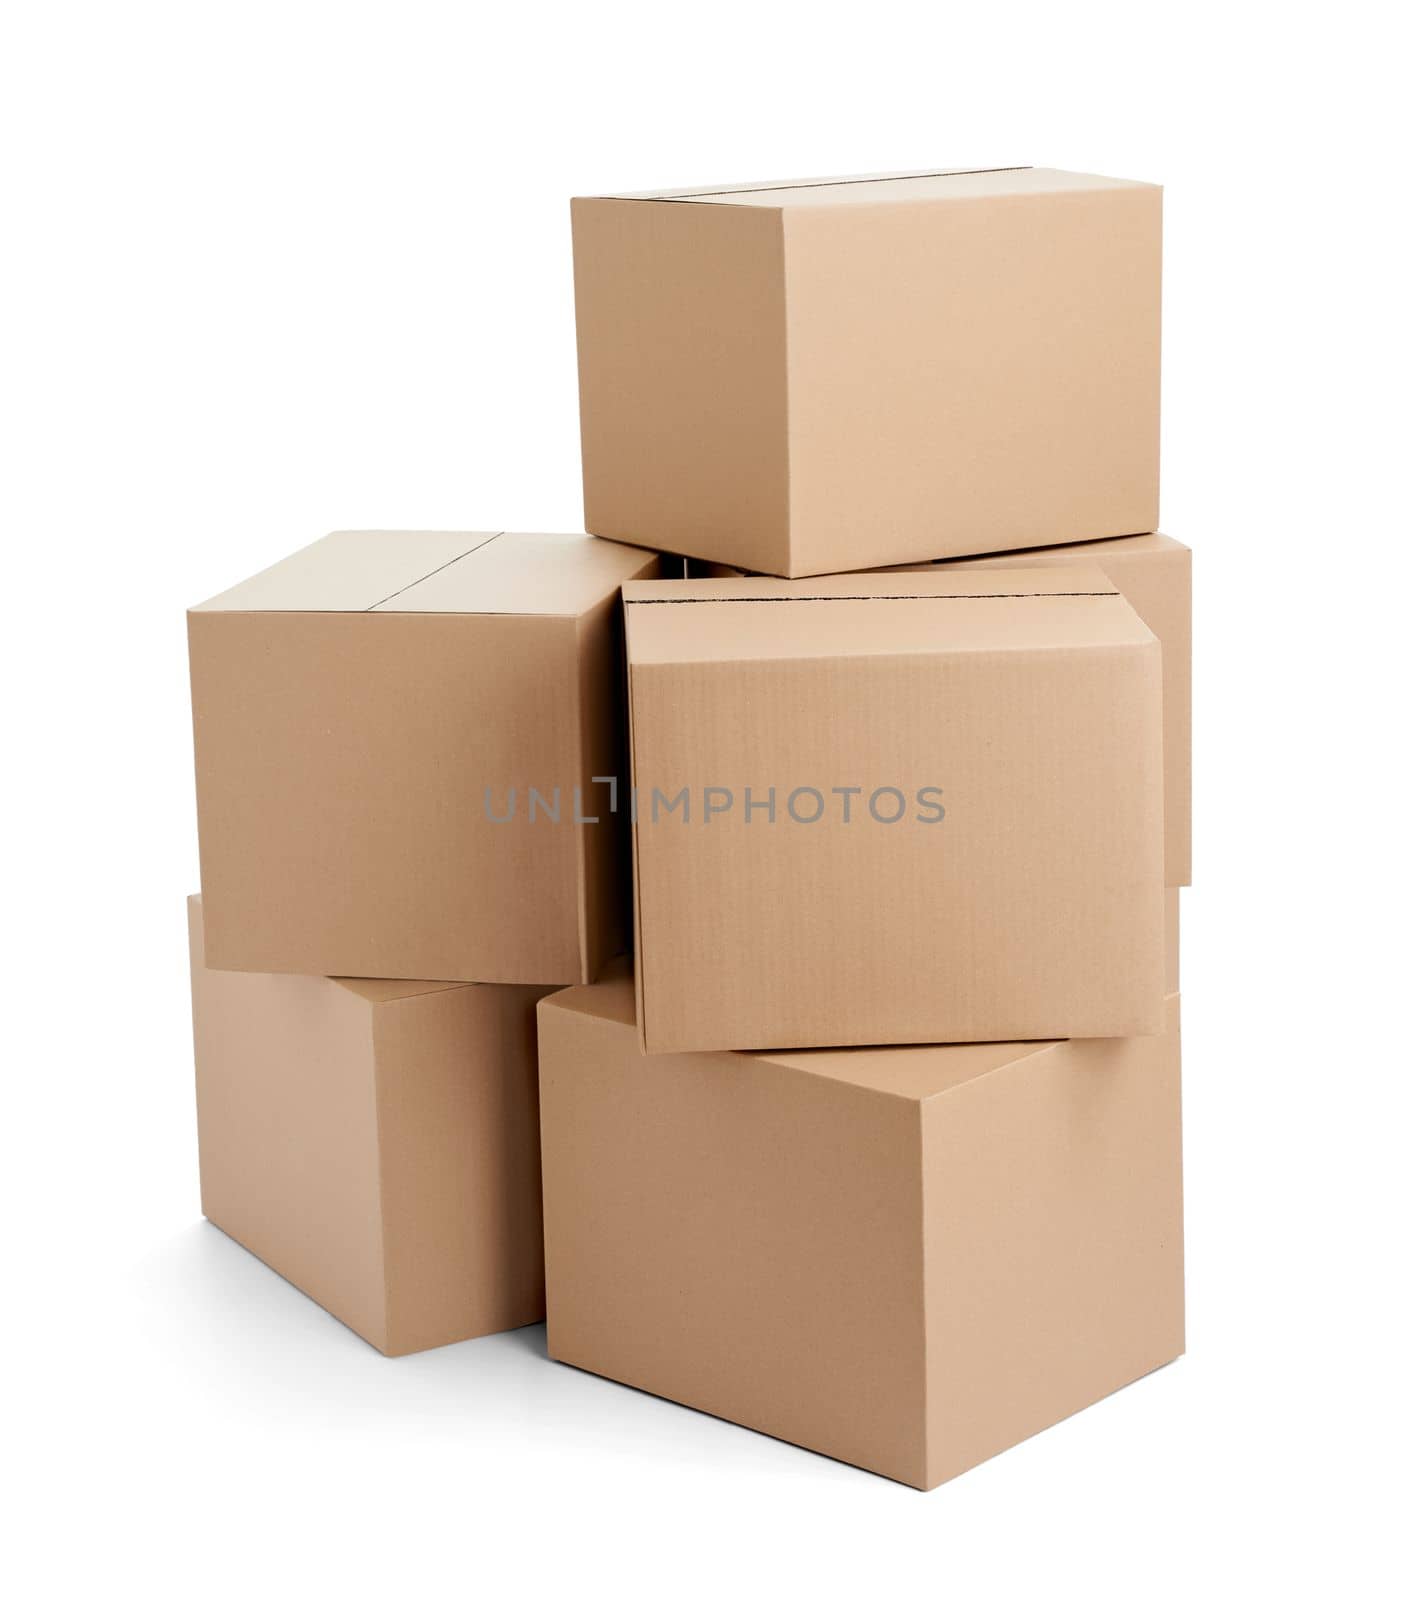 box package delivery cardboard carton by Picsfive